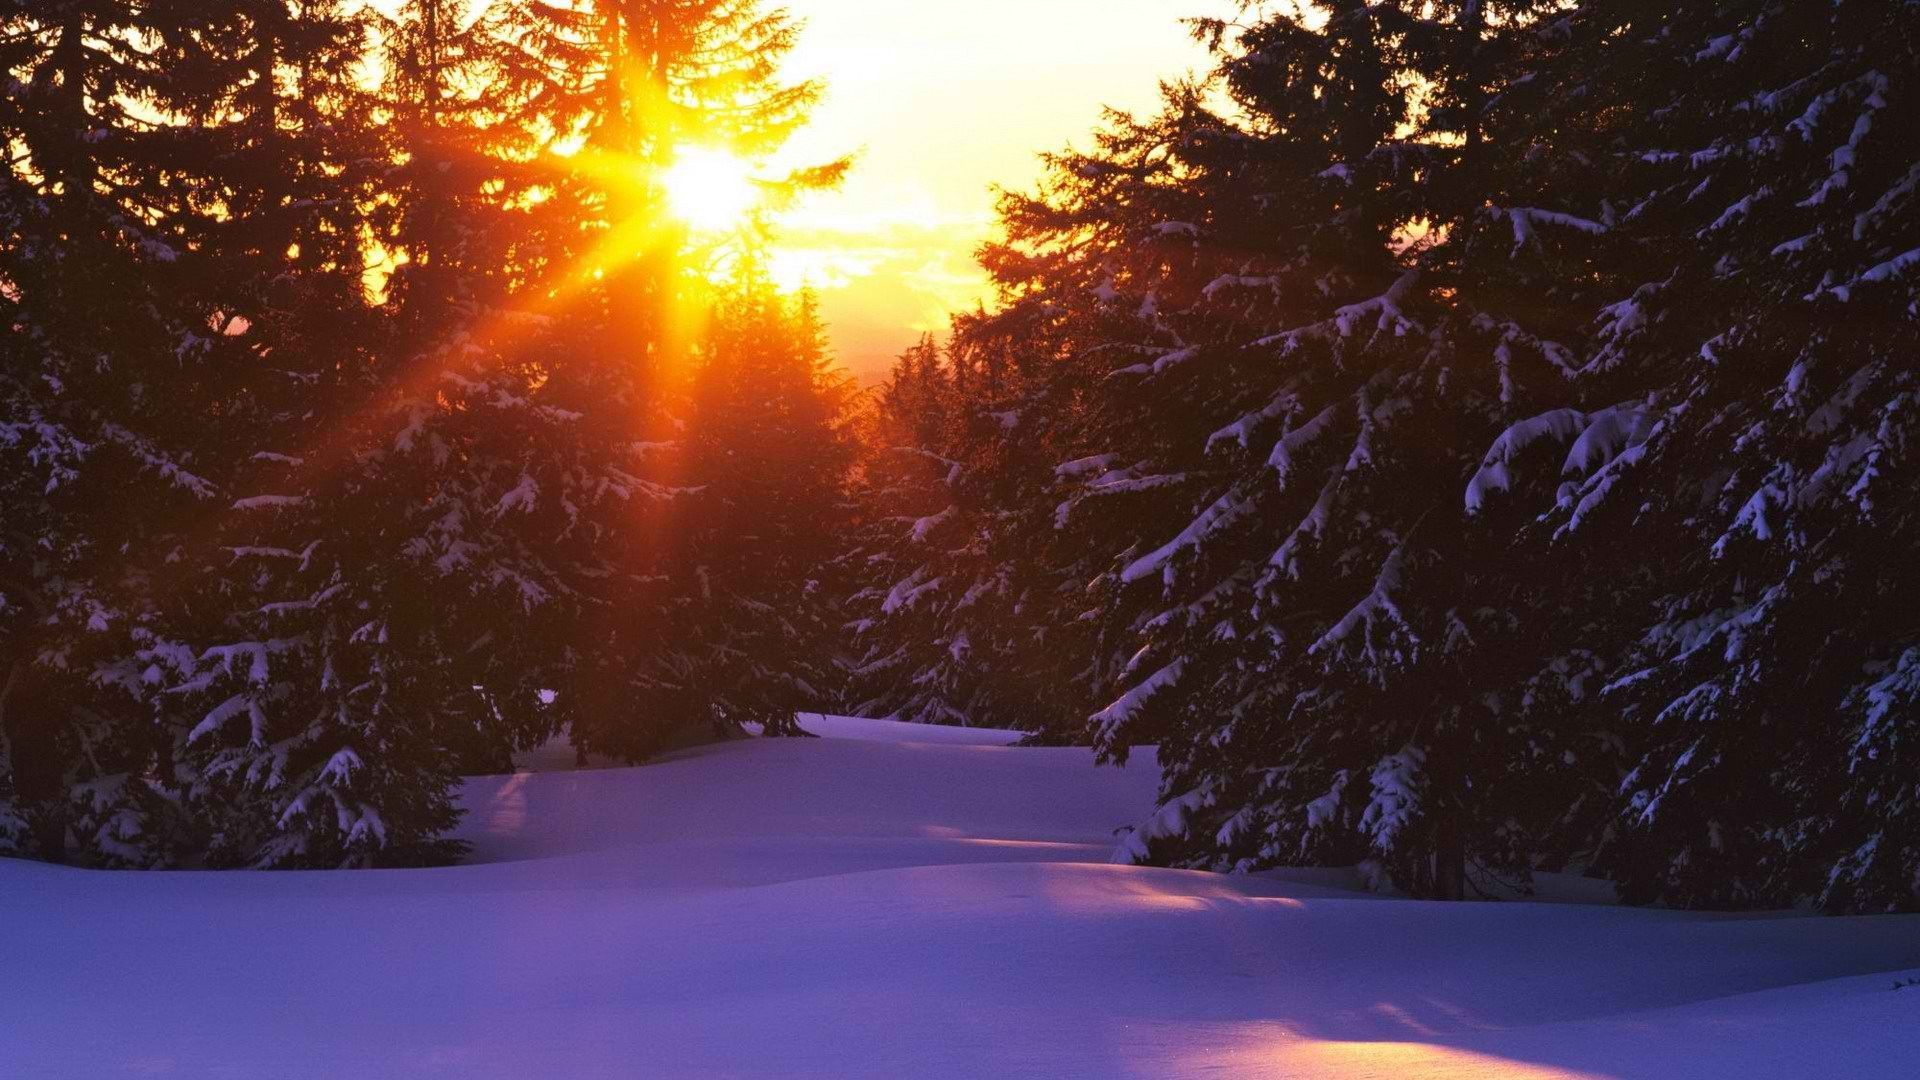 Sunset Over Snowy Forest Wallpaper